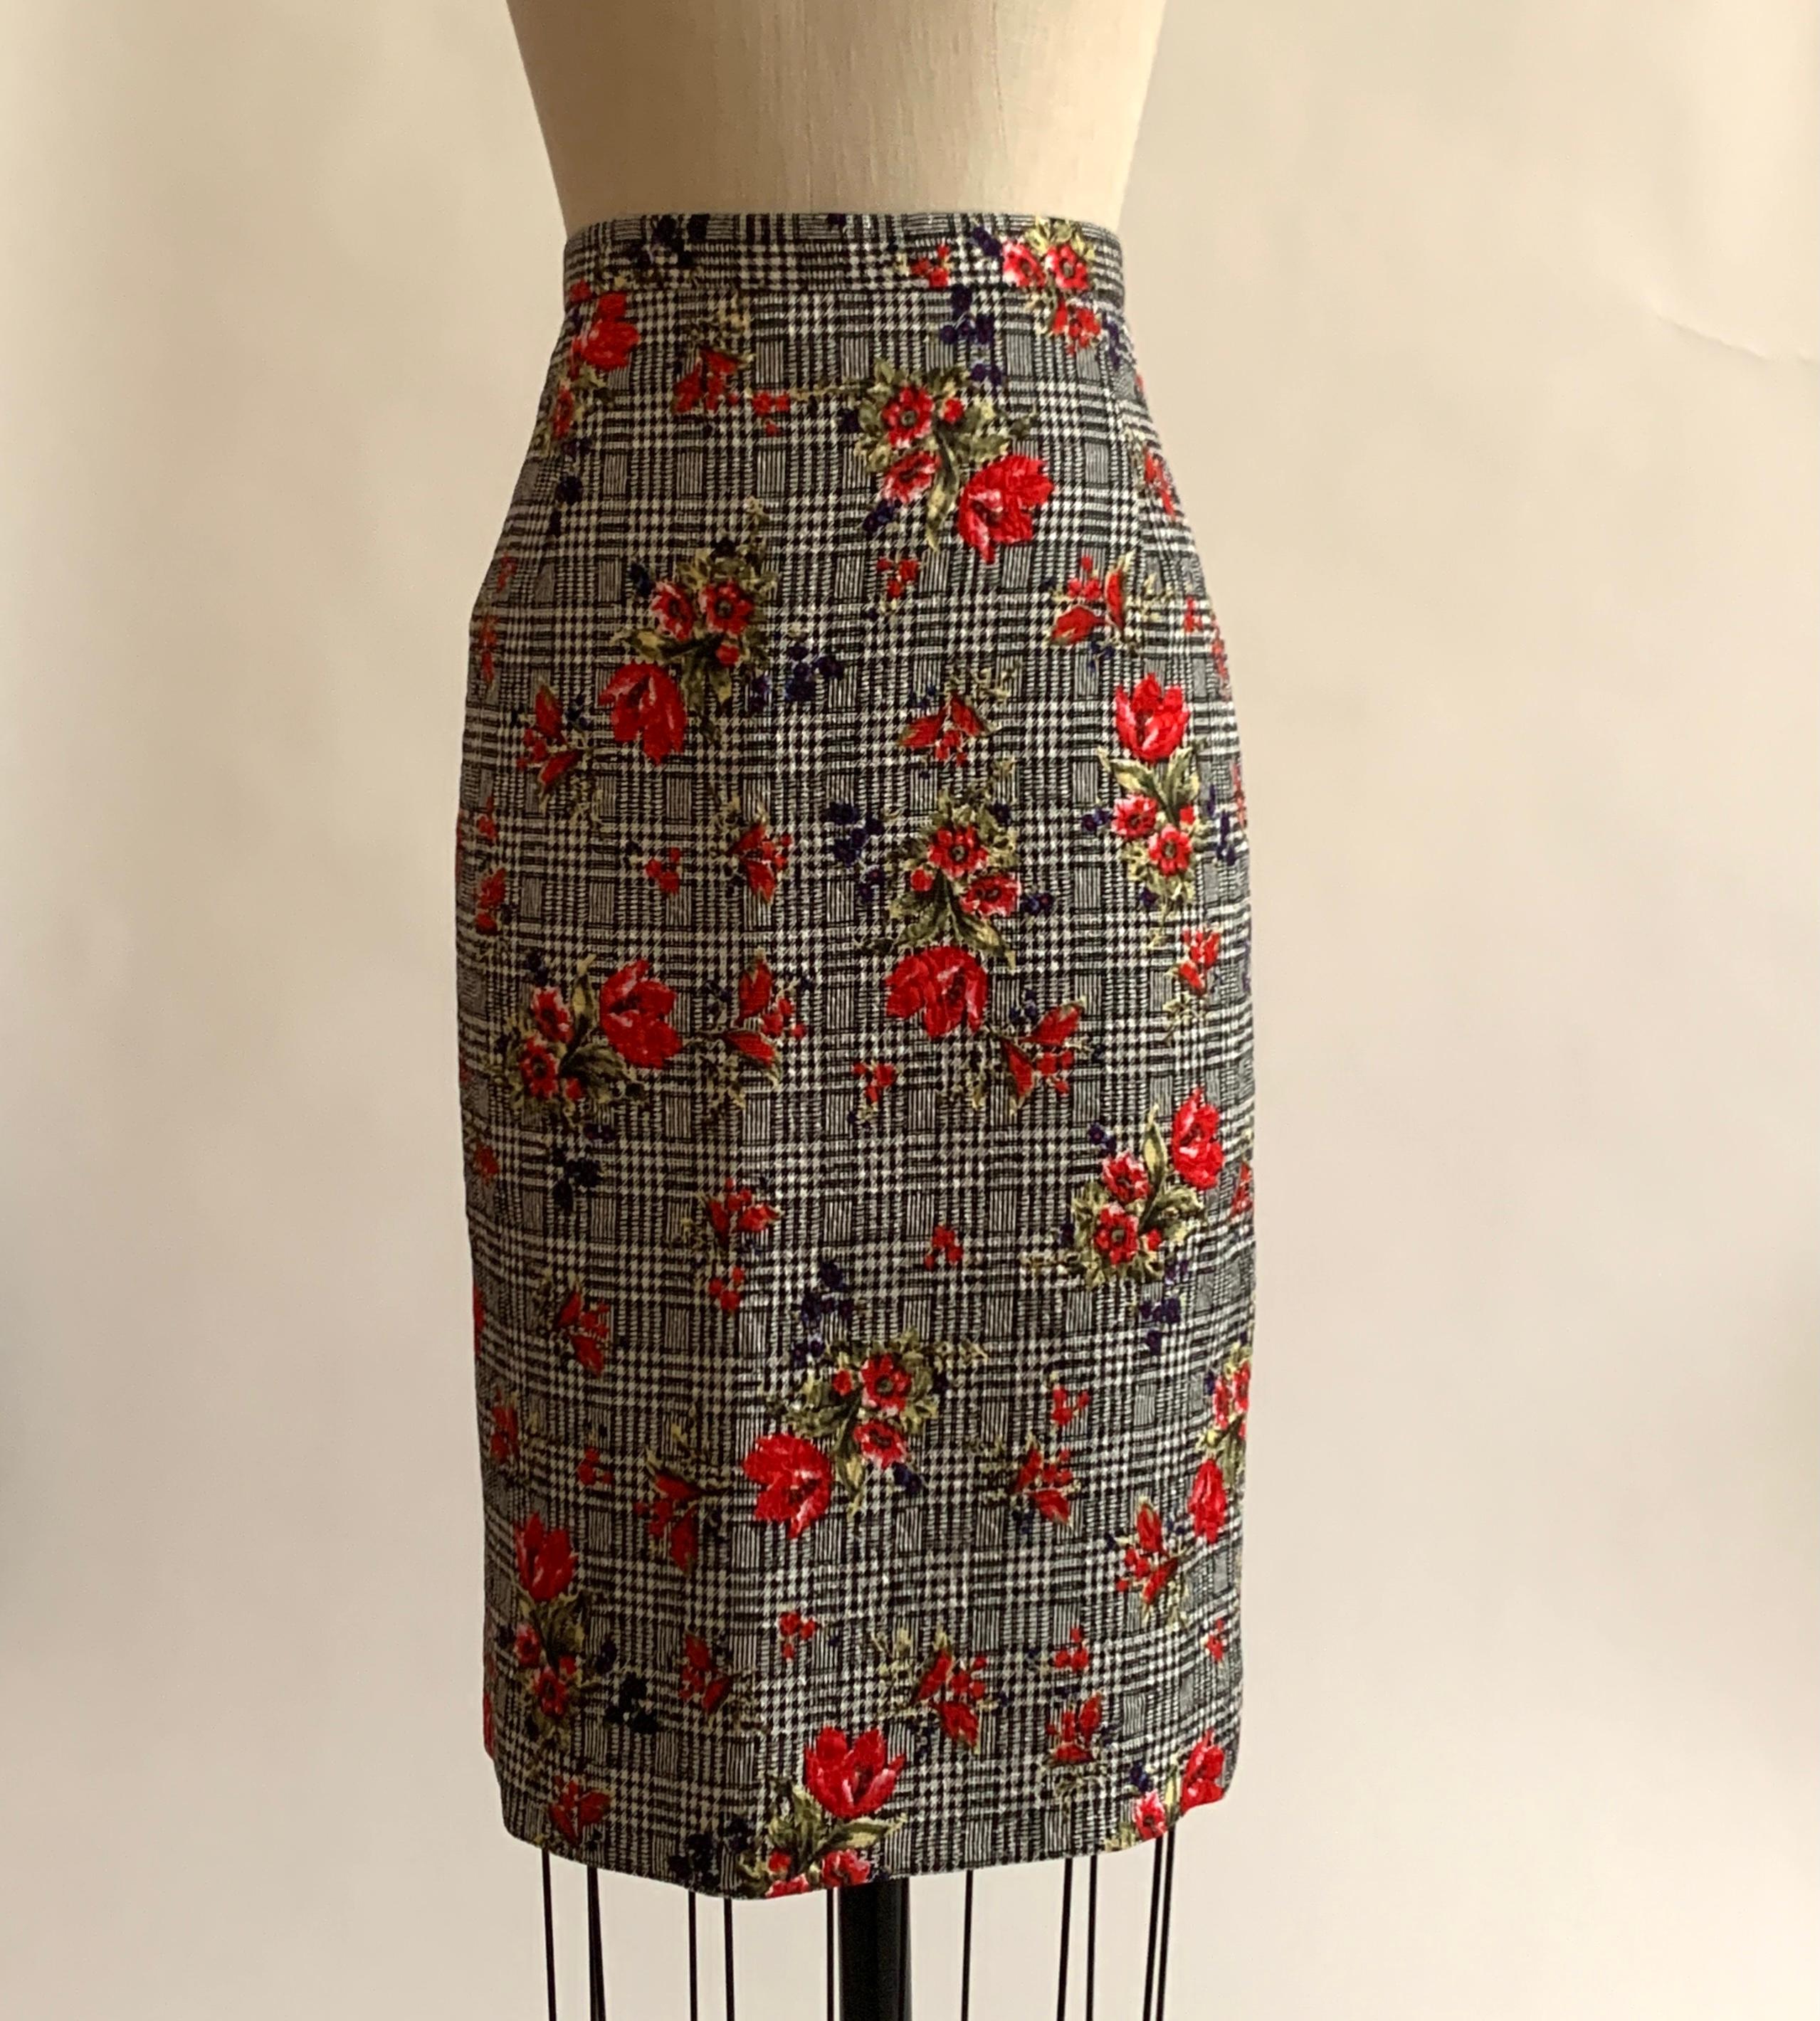 Oscar de la Renta black and white textured plaid check pencil skirt with red and purple flower print throughout. Back zip with hook and snap closure. Same print and similar skirt shown in Look 2 from the Resort 2014 presentation. 

68% wool, 32%